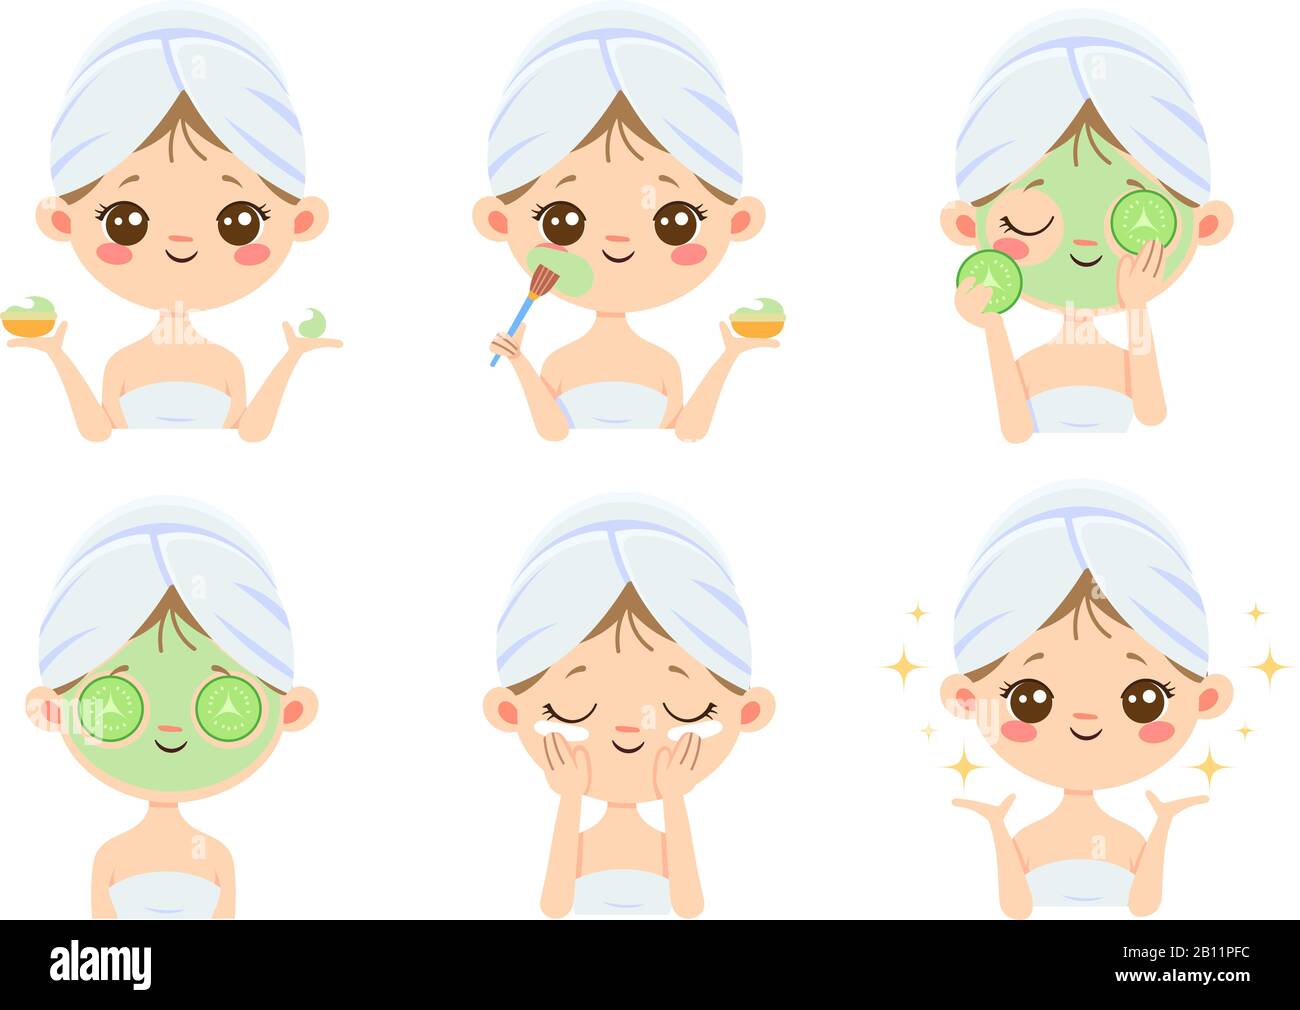 Beauty face mask. Woman skin care, cleaning and face brushing. Acne treatment masks vector cartoon illustration Stock Vector